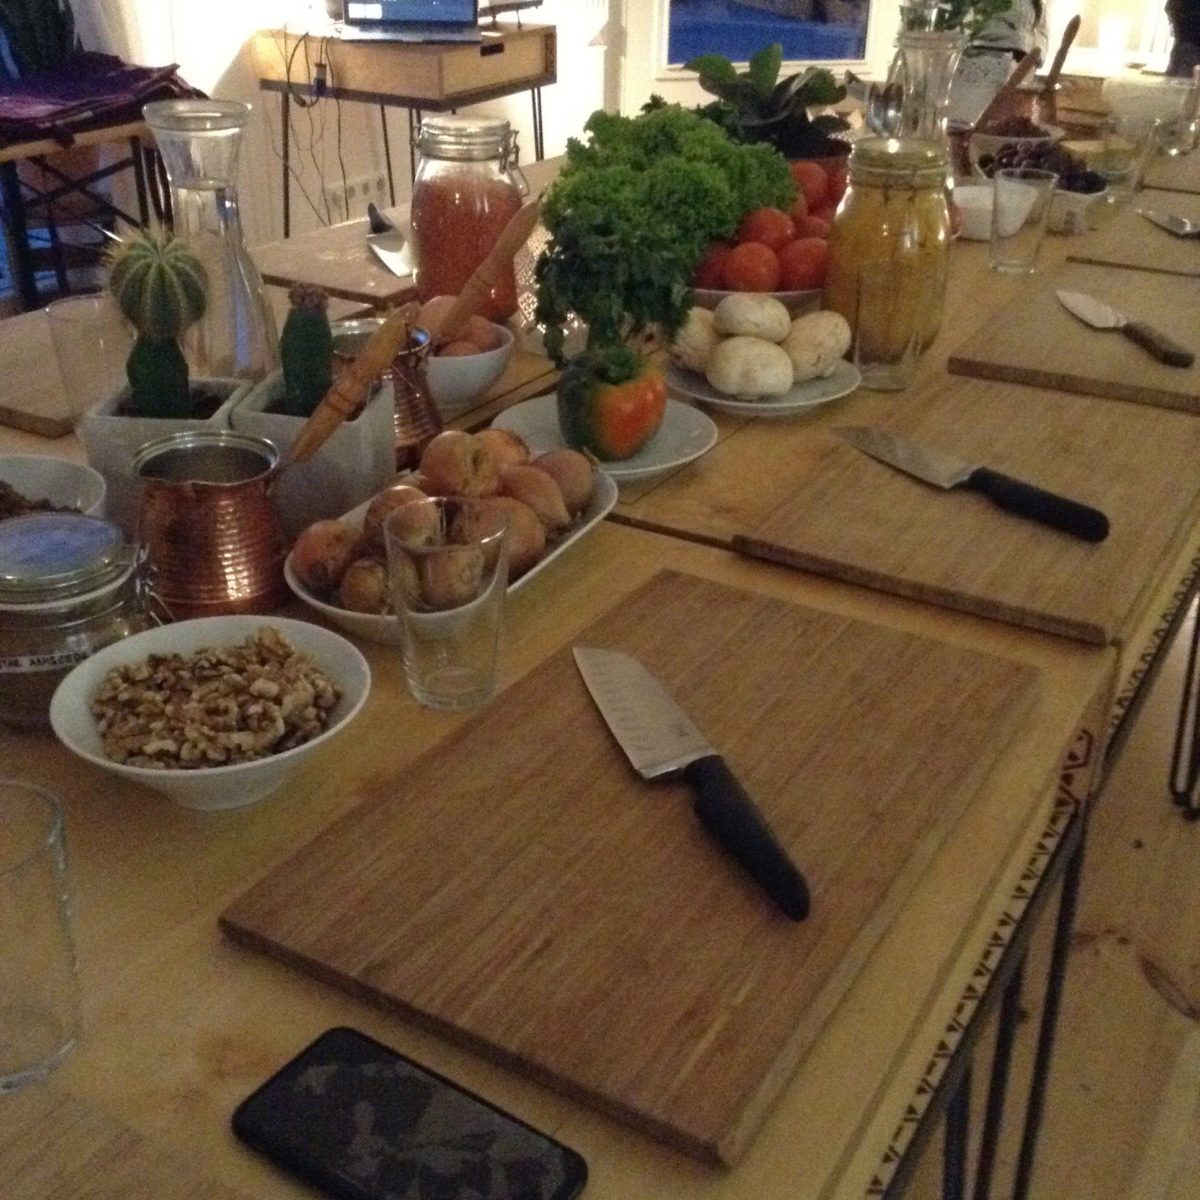 Table with several cutting boards and knifes, and food to prepare